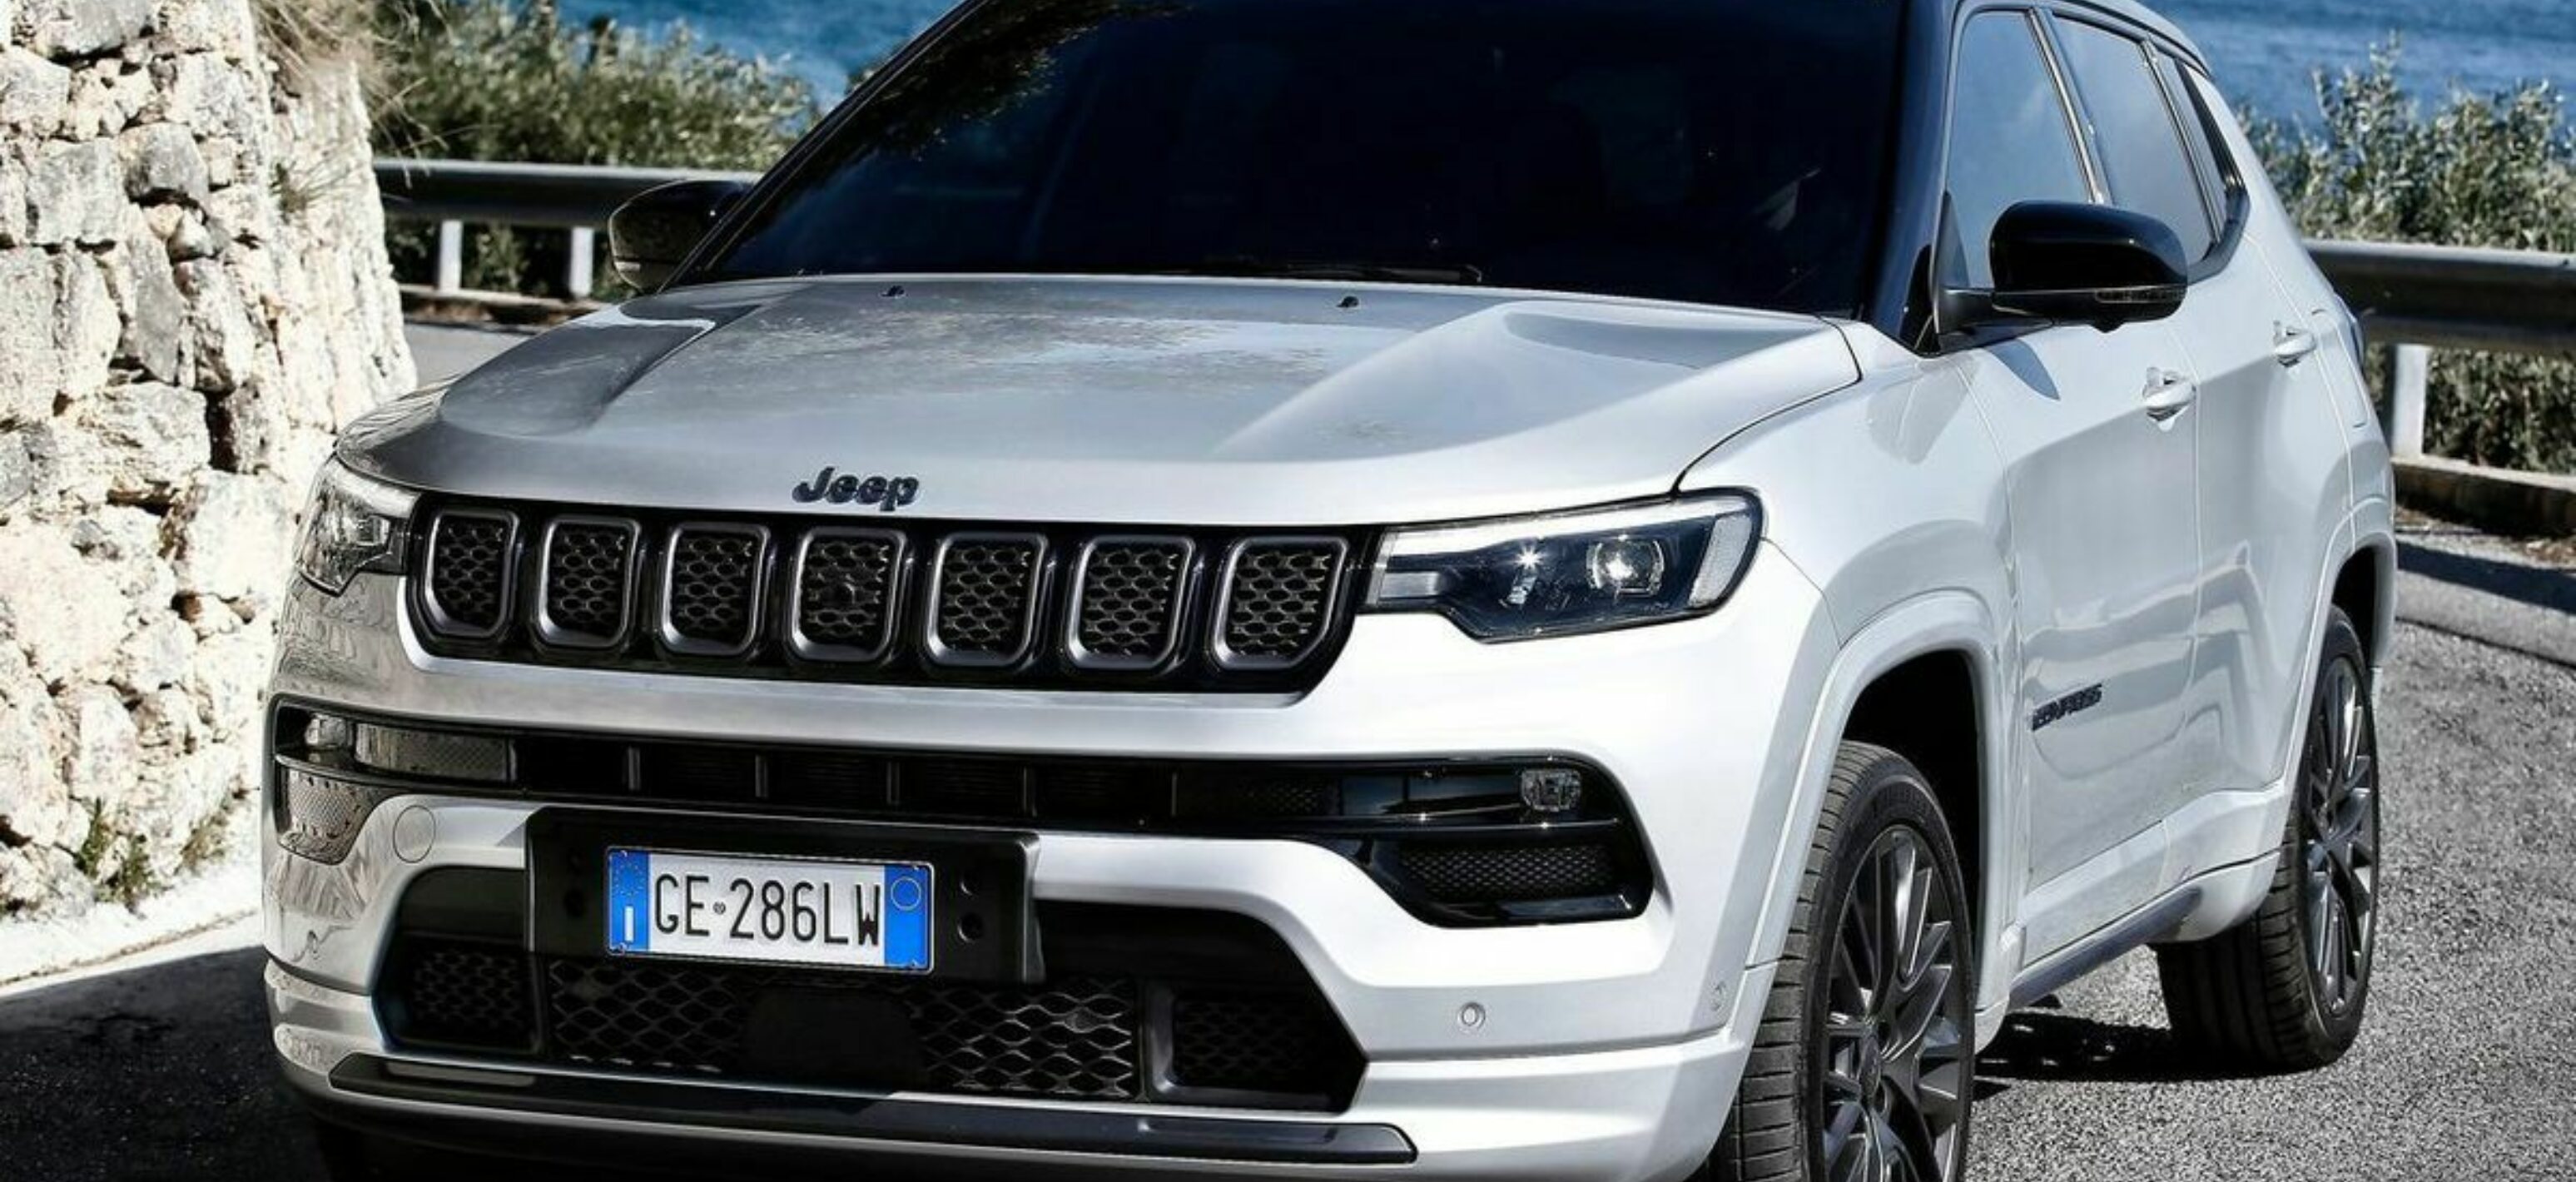 https://autofilter.sk/assets/images/compass/gallery/jeep-compass-2021_16-galeria.jpg - obrazok